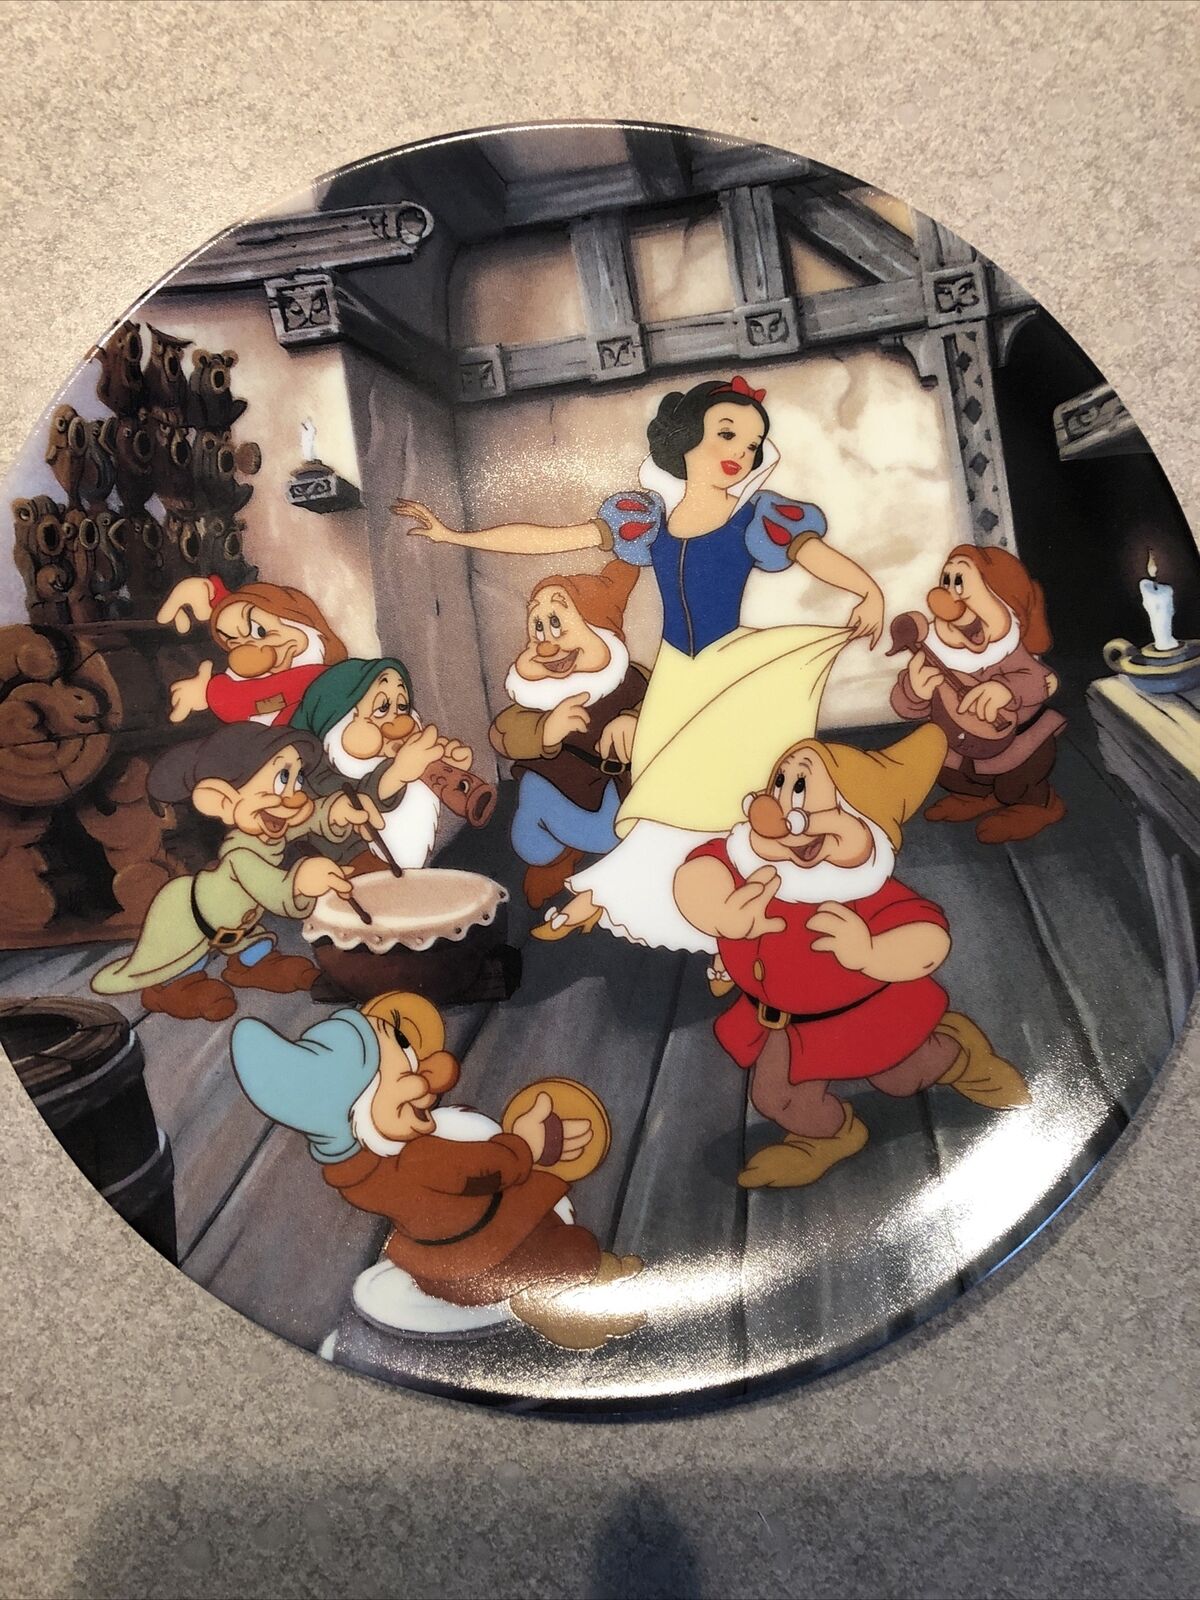 Disneys “The Dance Of Snow White And The Seven Dearfs” Limited Edition Series